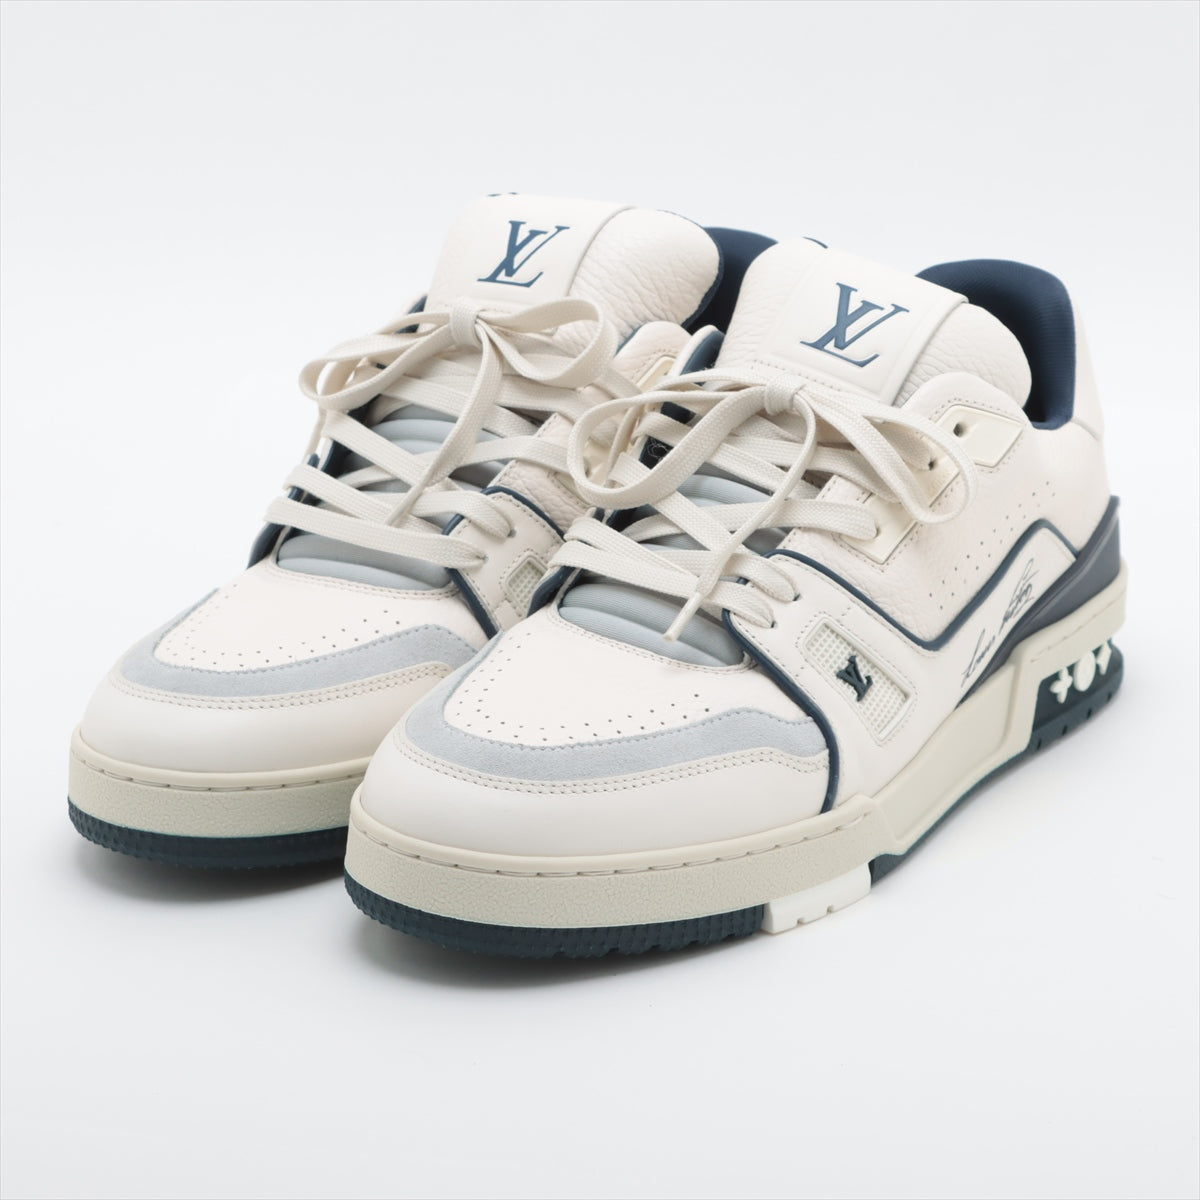 Louis Vuitton LV Trainer Line 23 years Leather & Suede Sneakers 7.5 Men's White x navy FD0213 box There is a storage bag